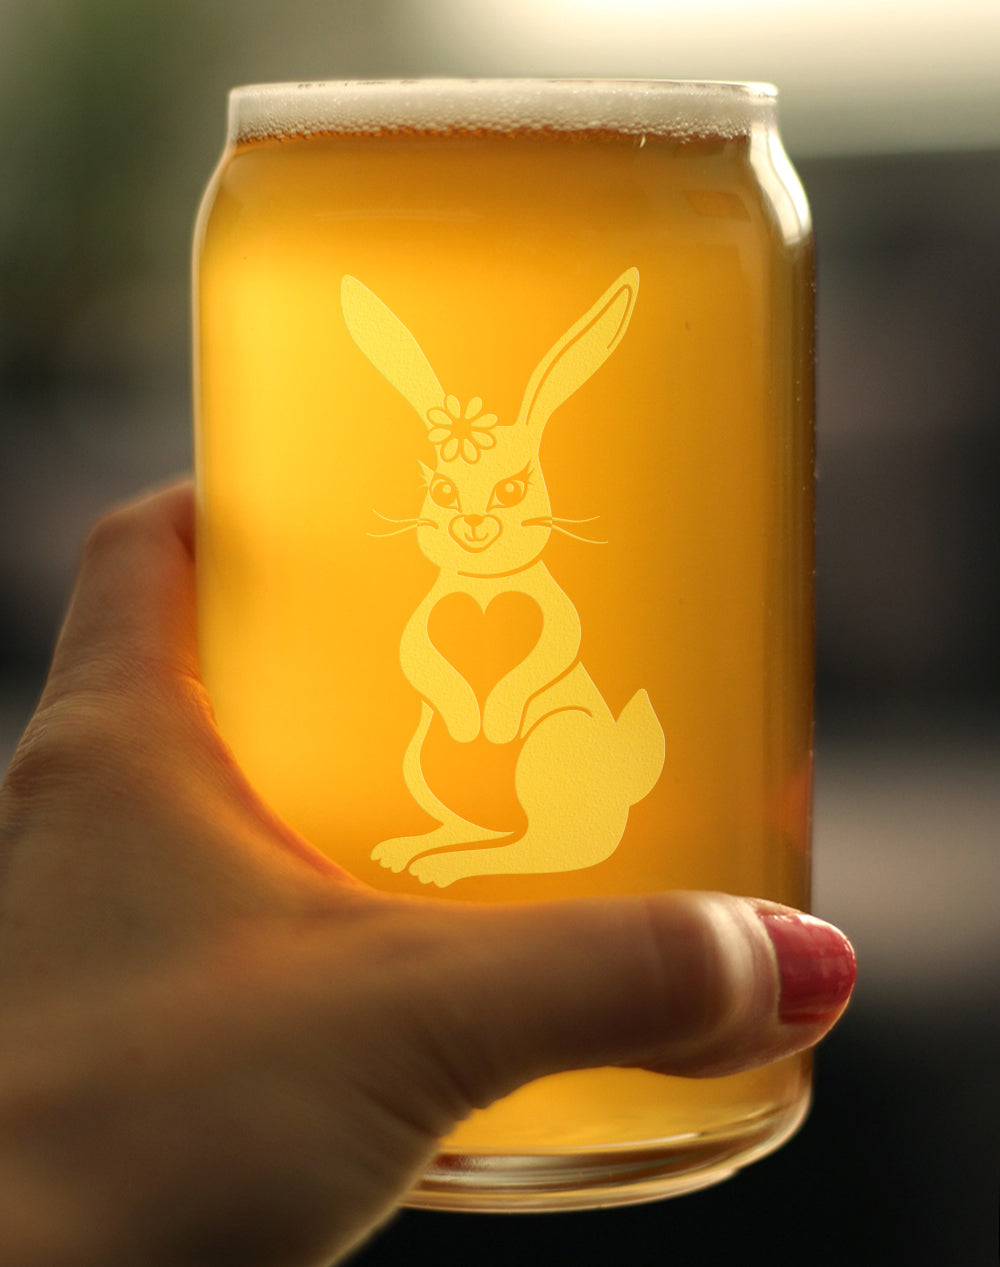 Cute Bunny Rabbit - Beer Can Pint Glass - Hand Engraved Gifts for Men &amp; Women That Love Bunnies